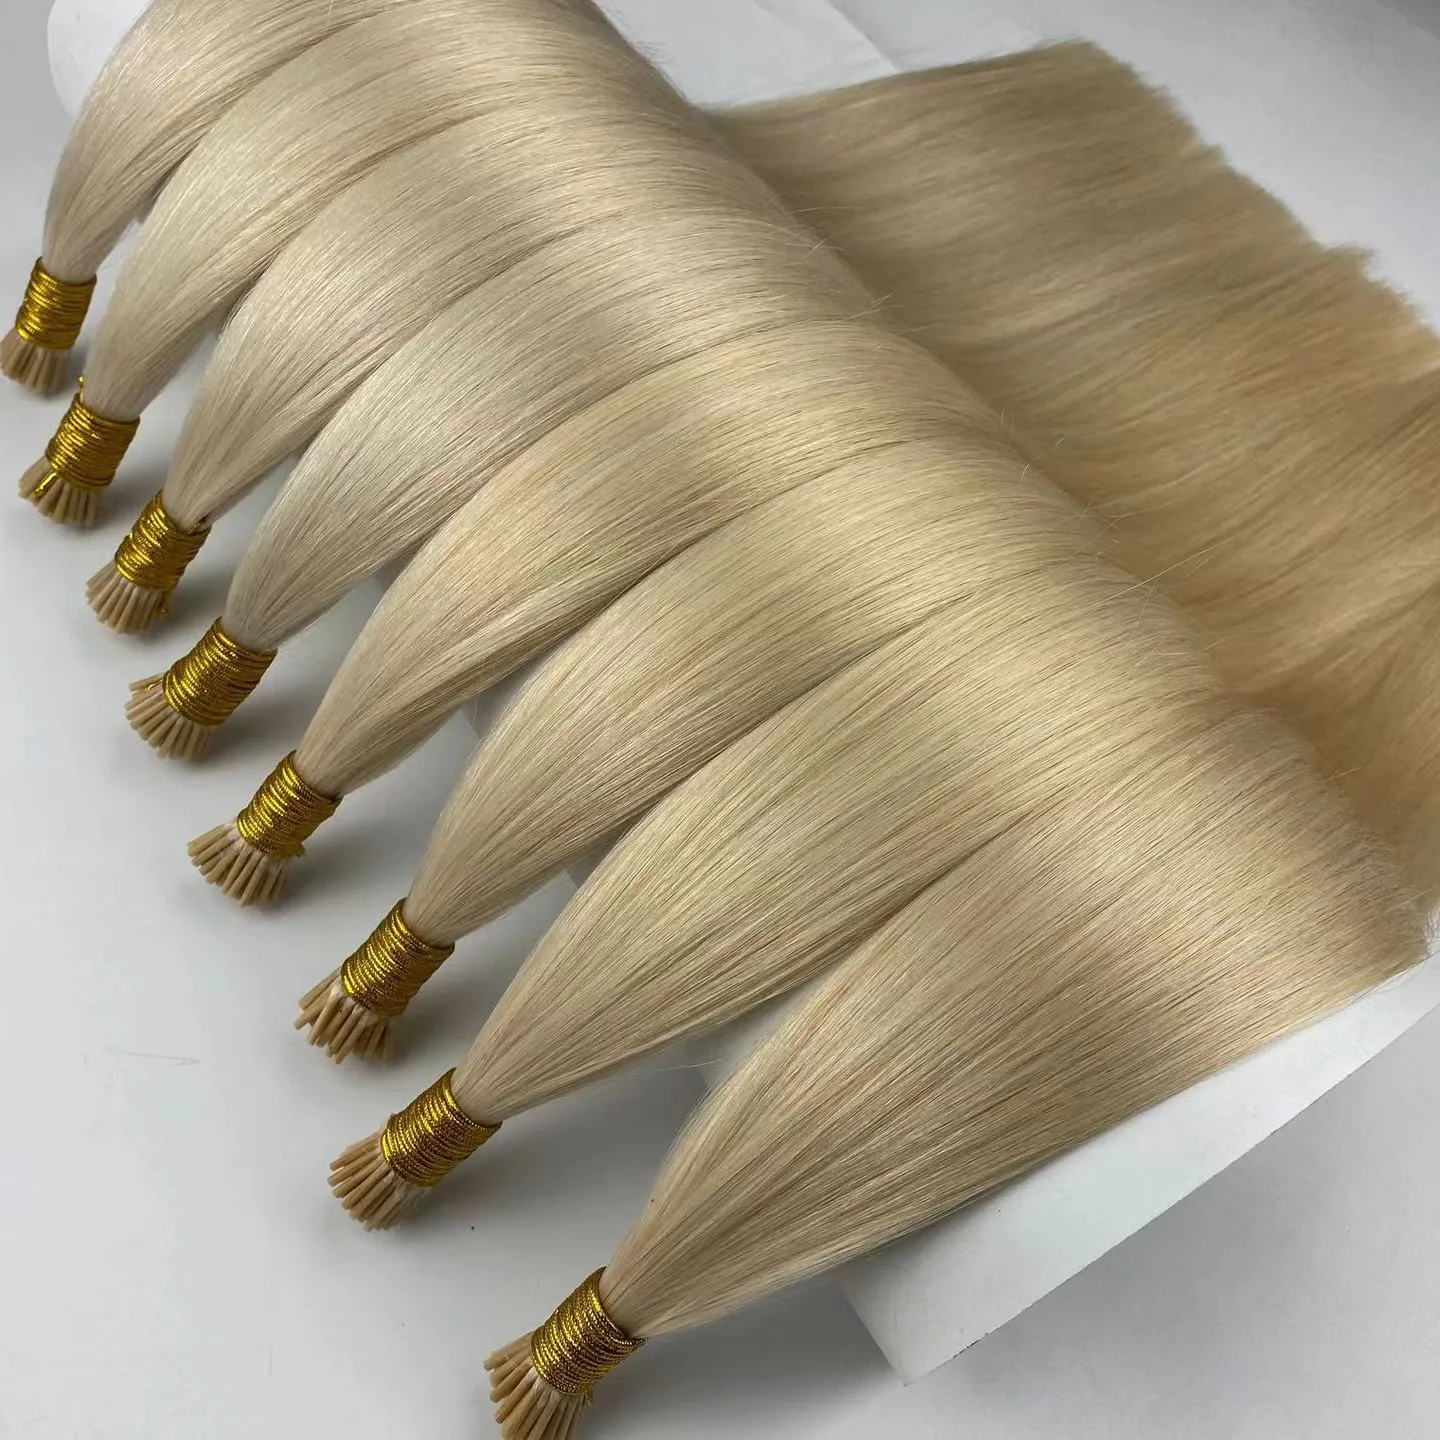 Fast Delivery Drawn Raw Human Hair Extension Remy Virgin I Tip Hair Human Extension